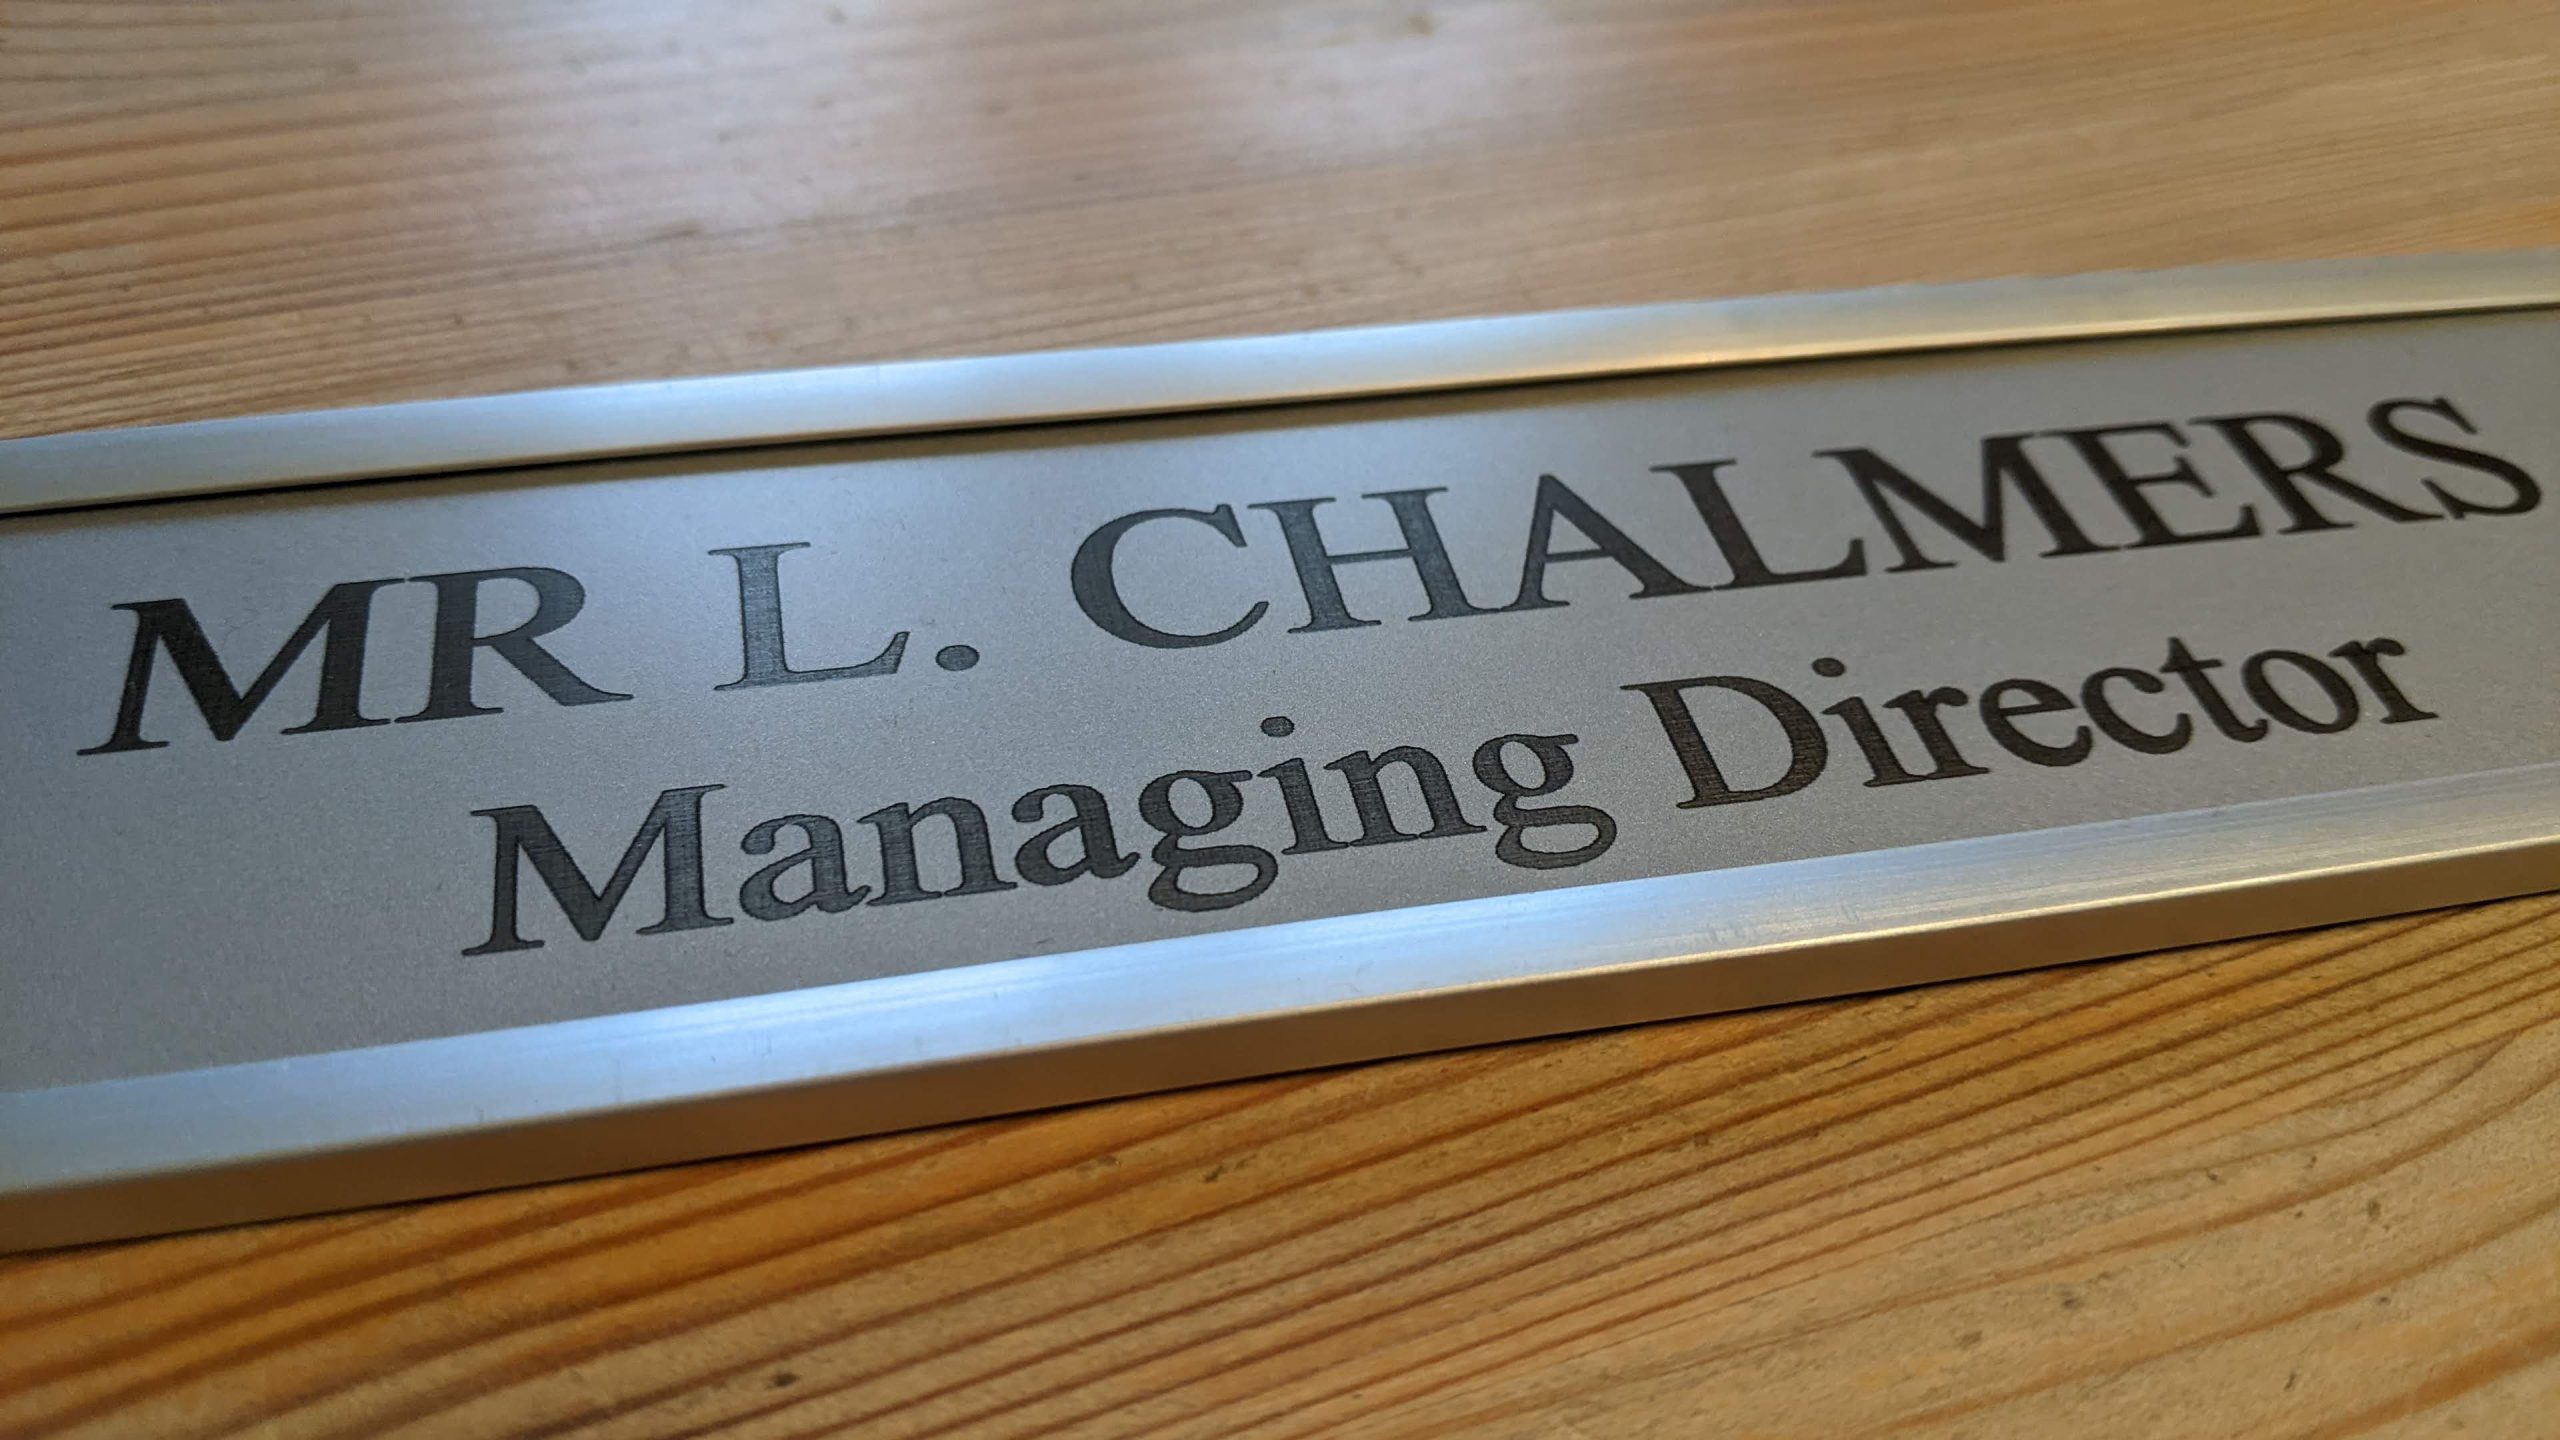 Make a statement at your office entrance - 10" x 2" aluminum door sign displayed in contemporary aluminum holder.